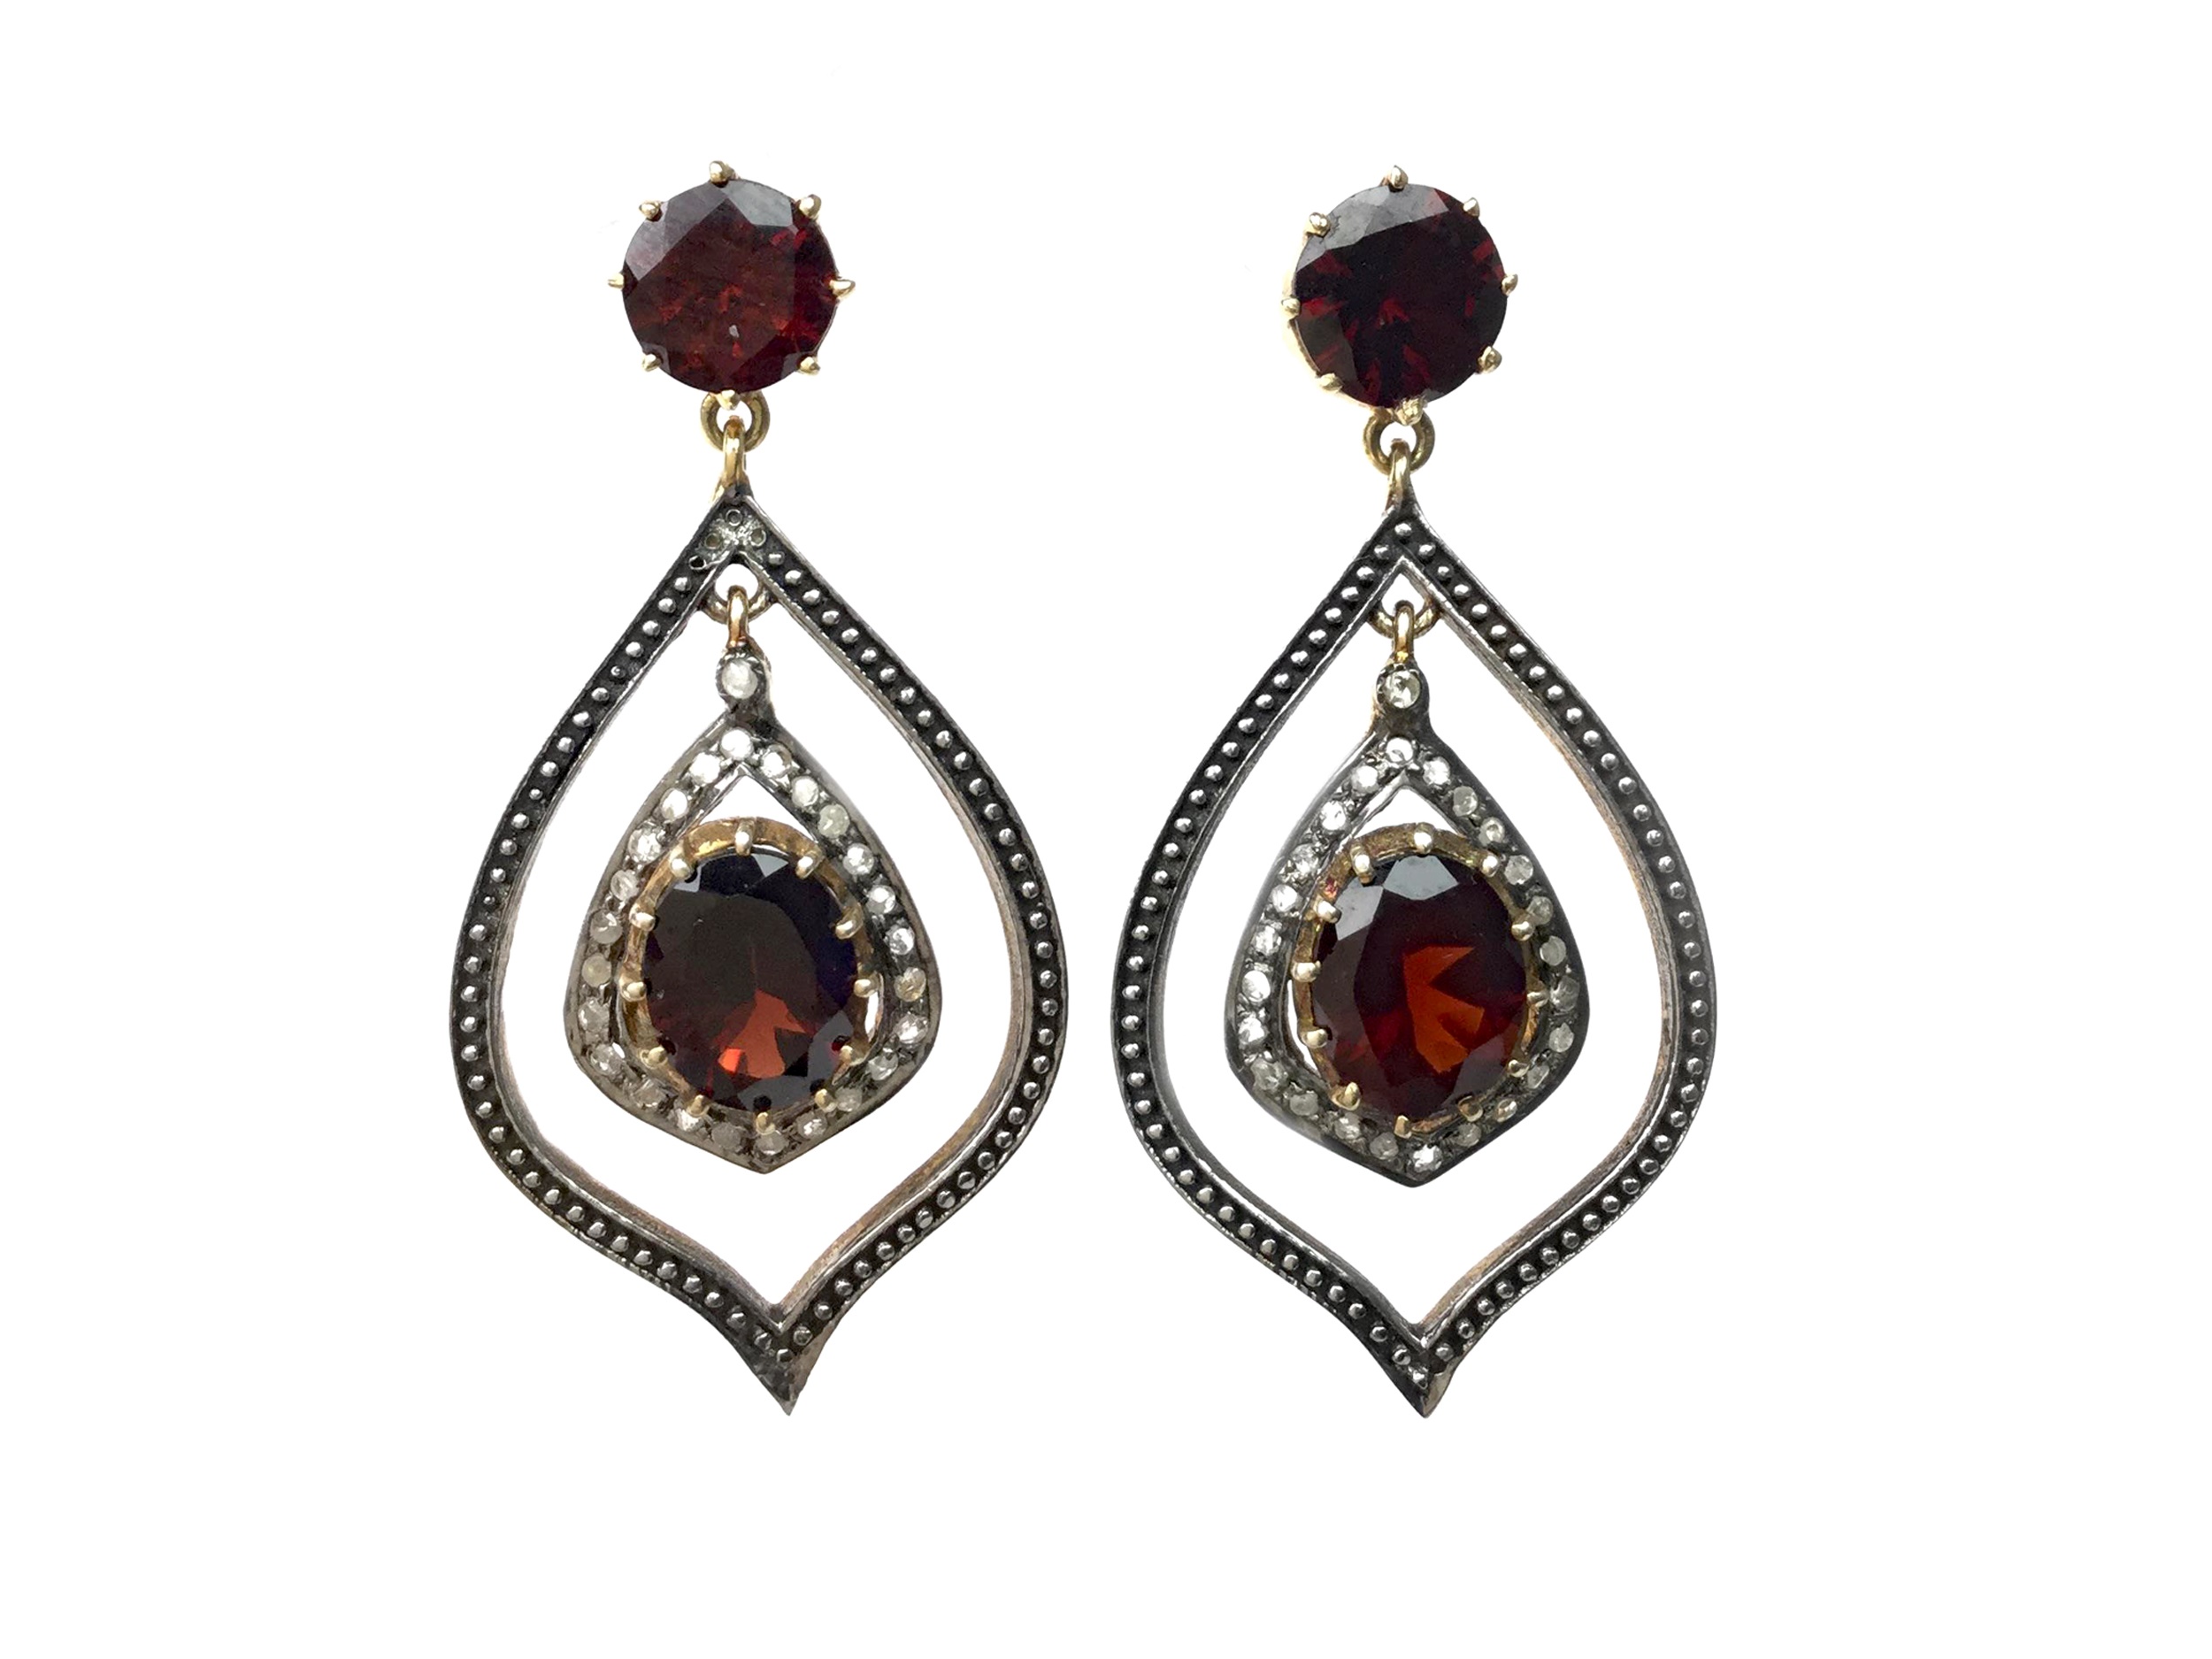 A PAIR OF GOLD PLATED GARNET AND DIAMOND EARRINGS